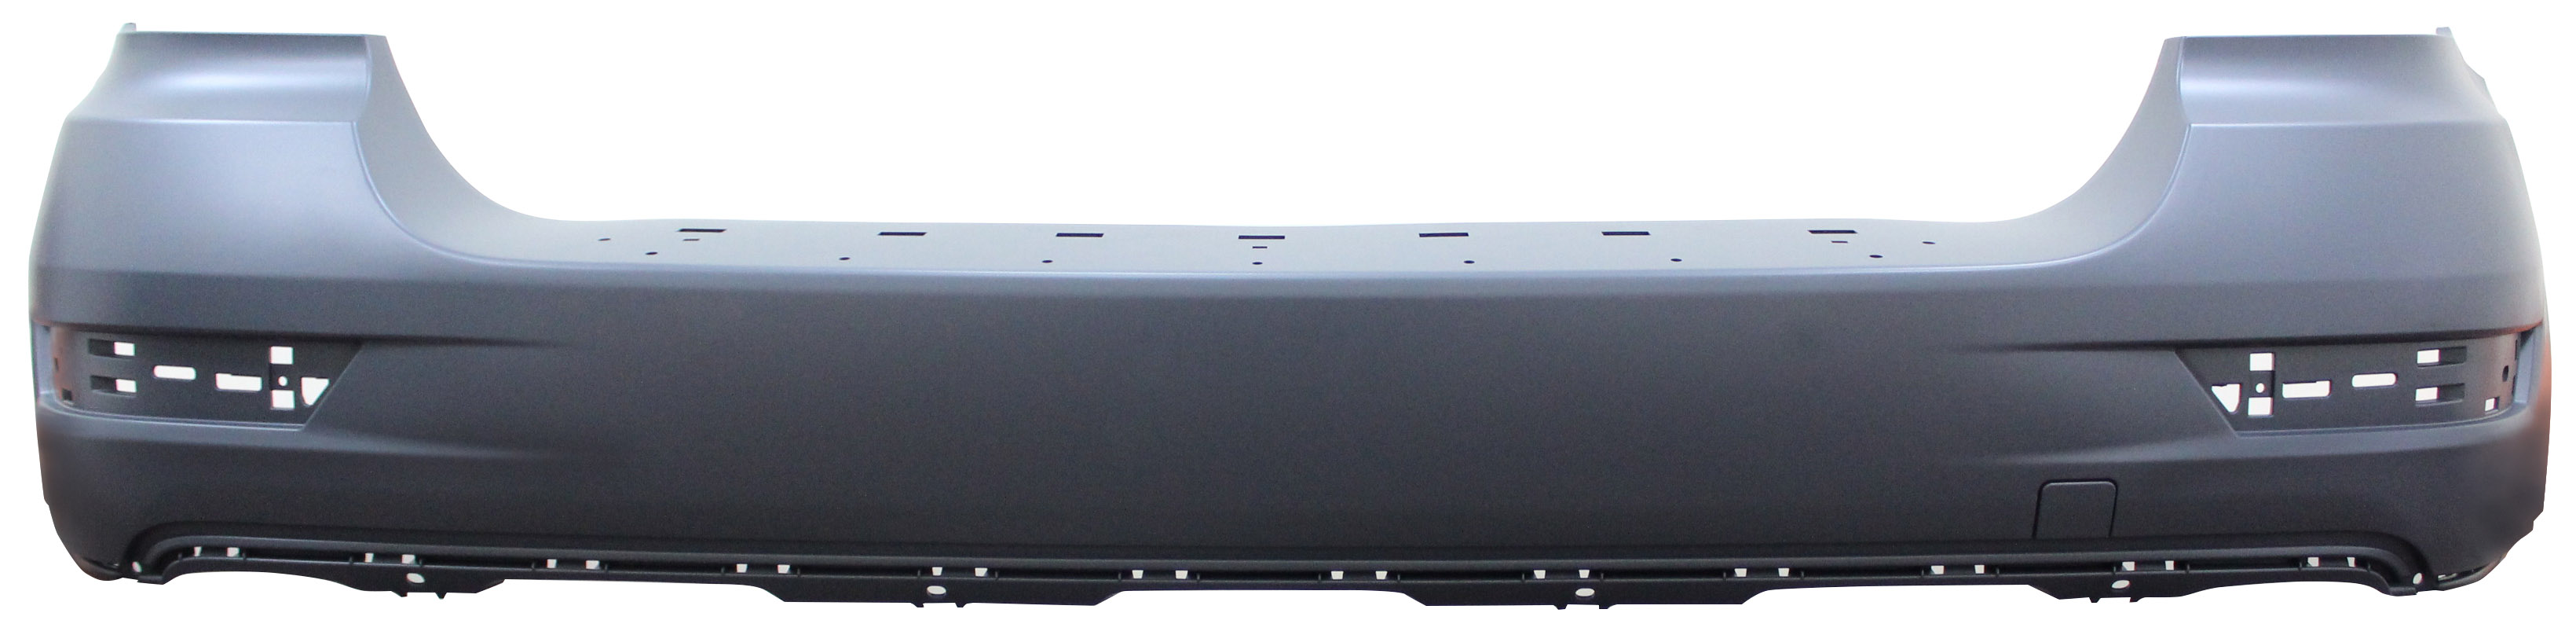 Aftermarket BUMPER COVERS for MERCEDES-BENZ - ML320, ML320,07-09,Rear bumper cover